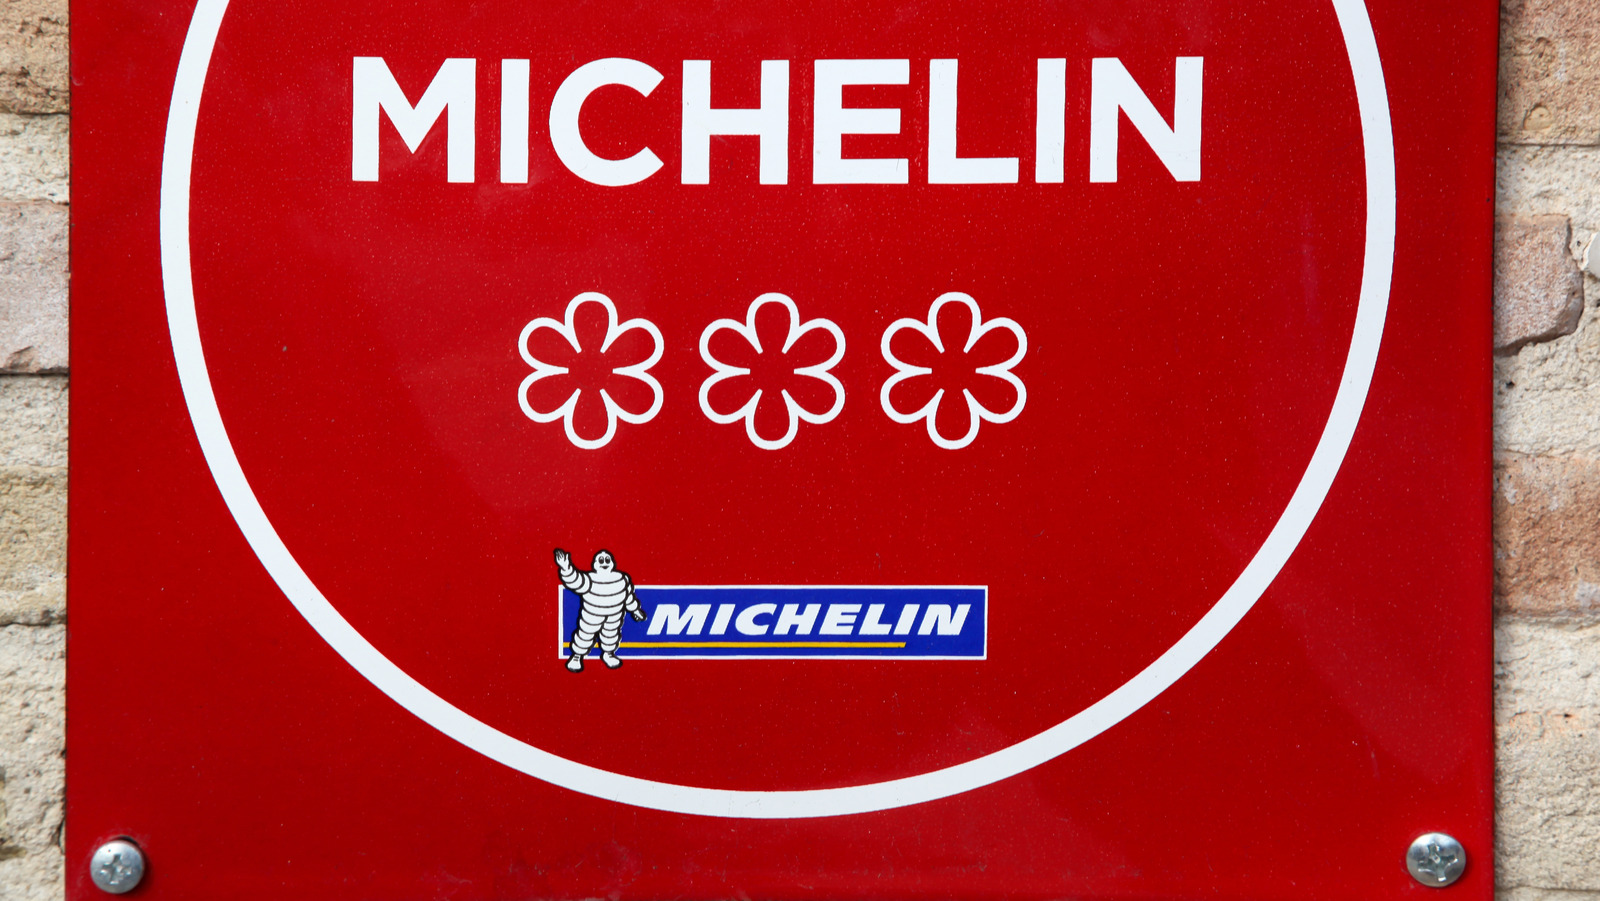 What is a Michelin star restaurant, really? Why do we care?